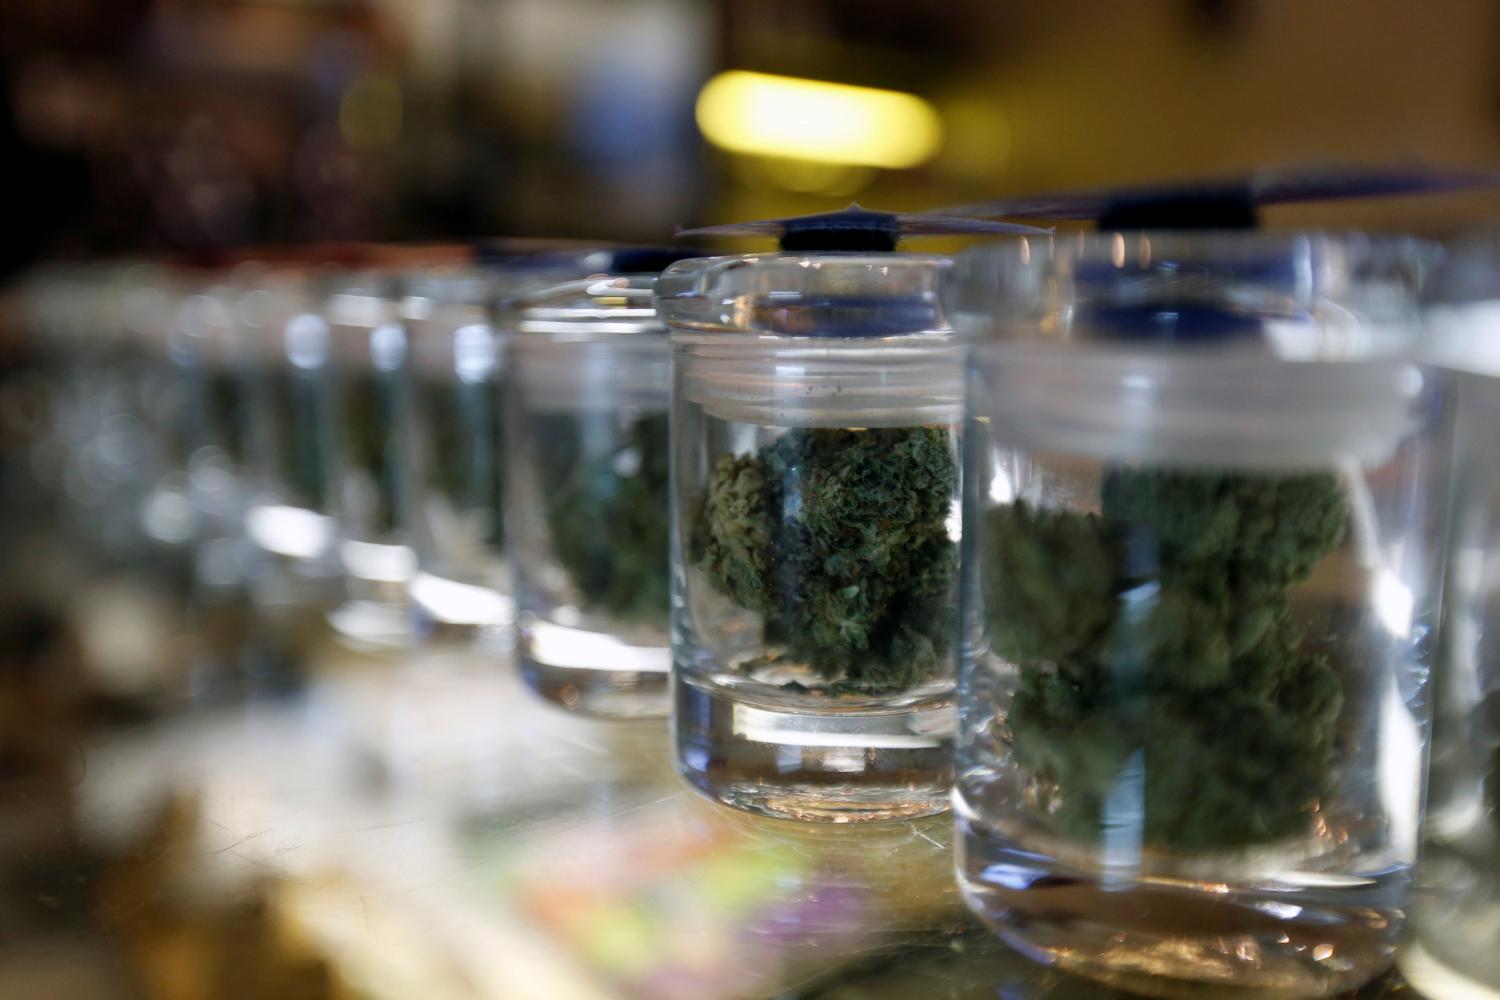 A variety of medicinal marijuana buds in jars are pictured at Los Angeles Patients & Caregivers Group dispensary in West Hollywood, California U.S., October 18, 2016. Picture taken October 18, 2016. REUTERS/Mario Anzuoni - RTX2R4MU